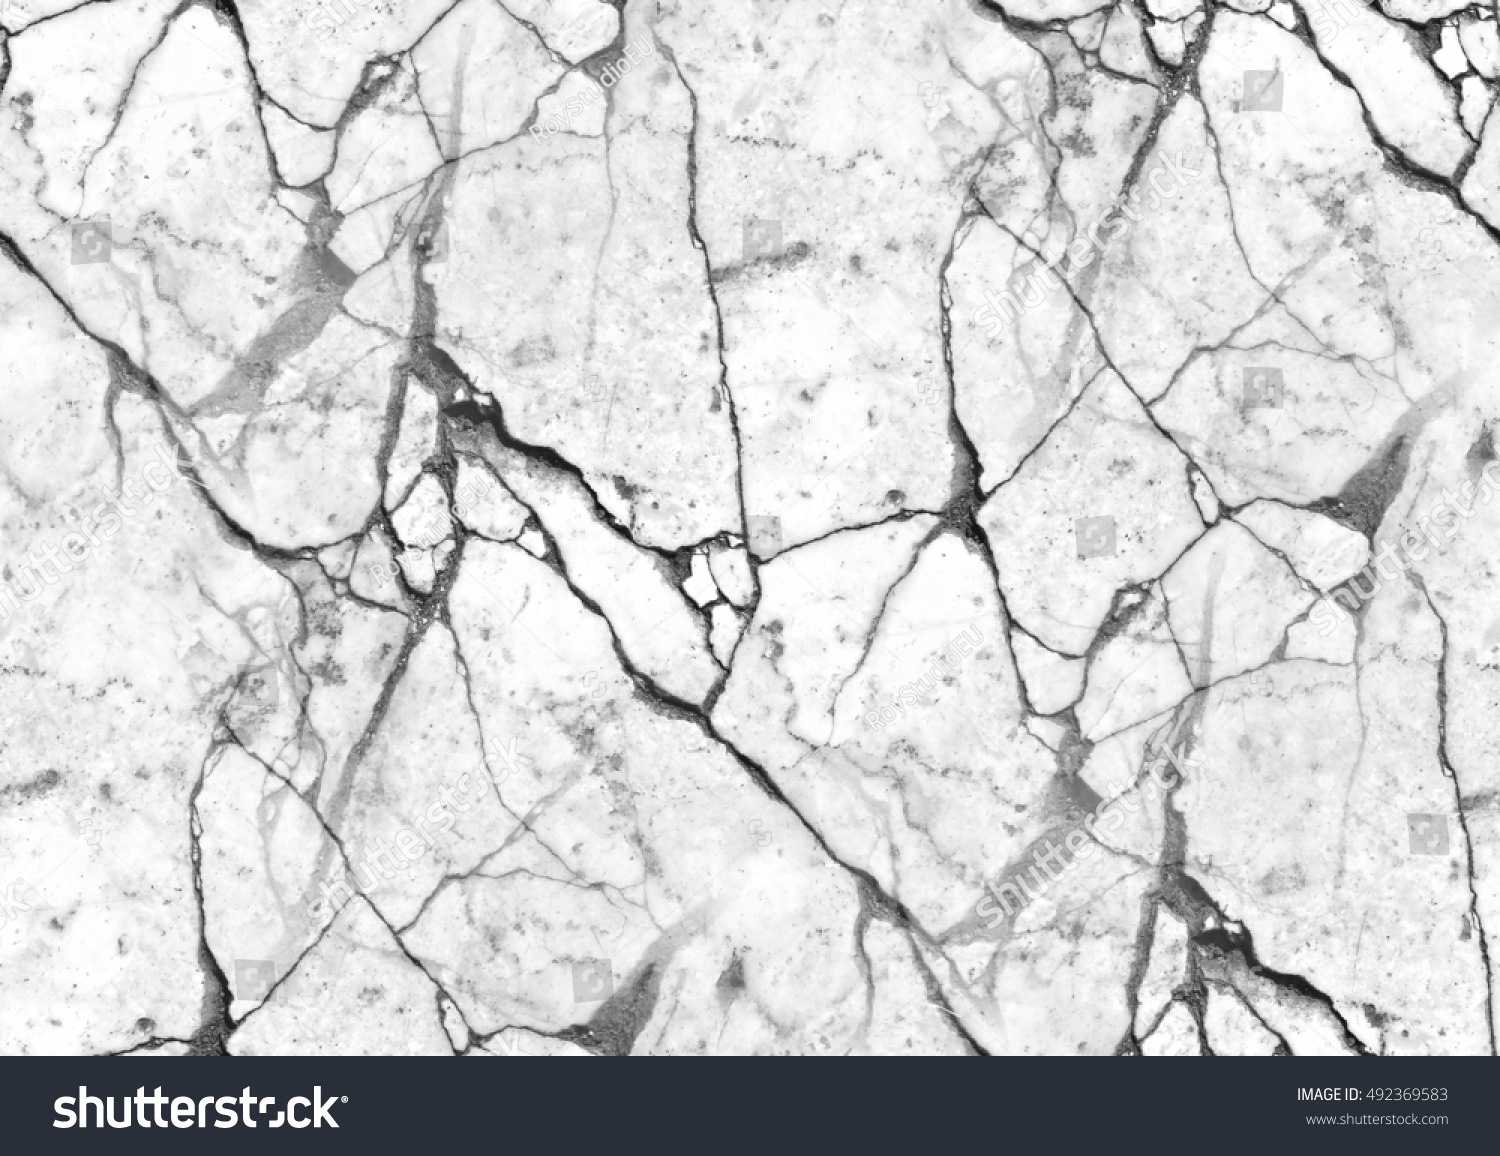 black and white background distressed texture seamless pattern #492369583